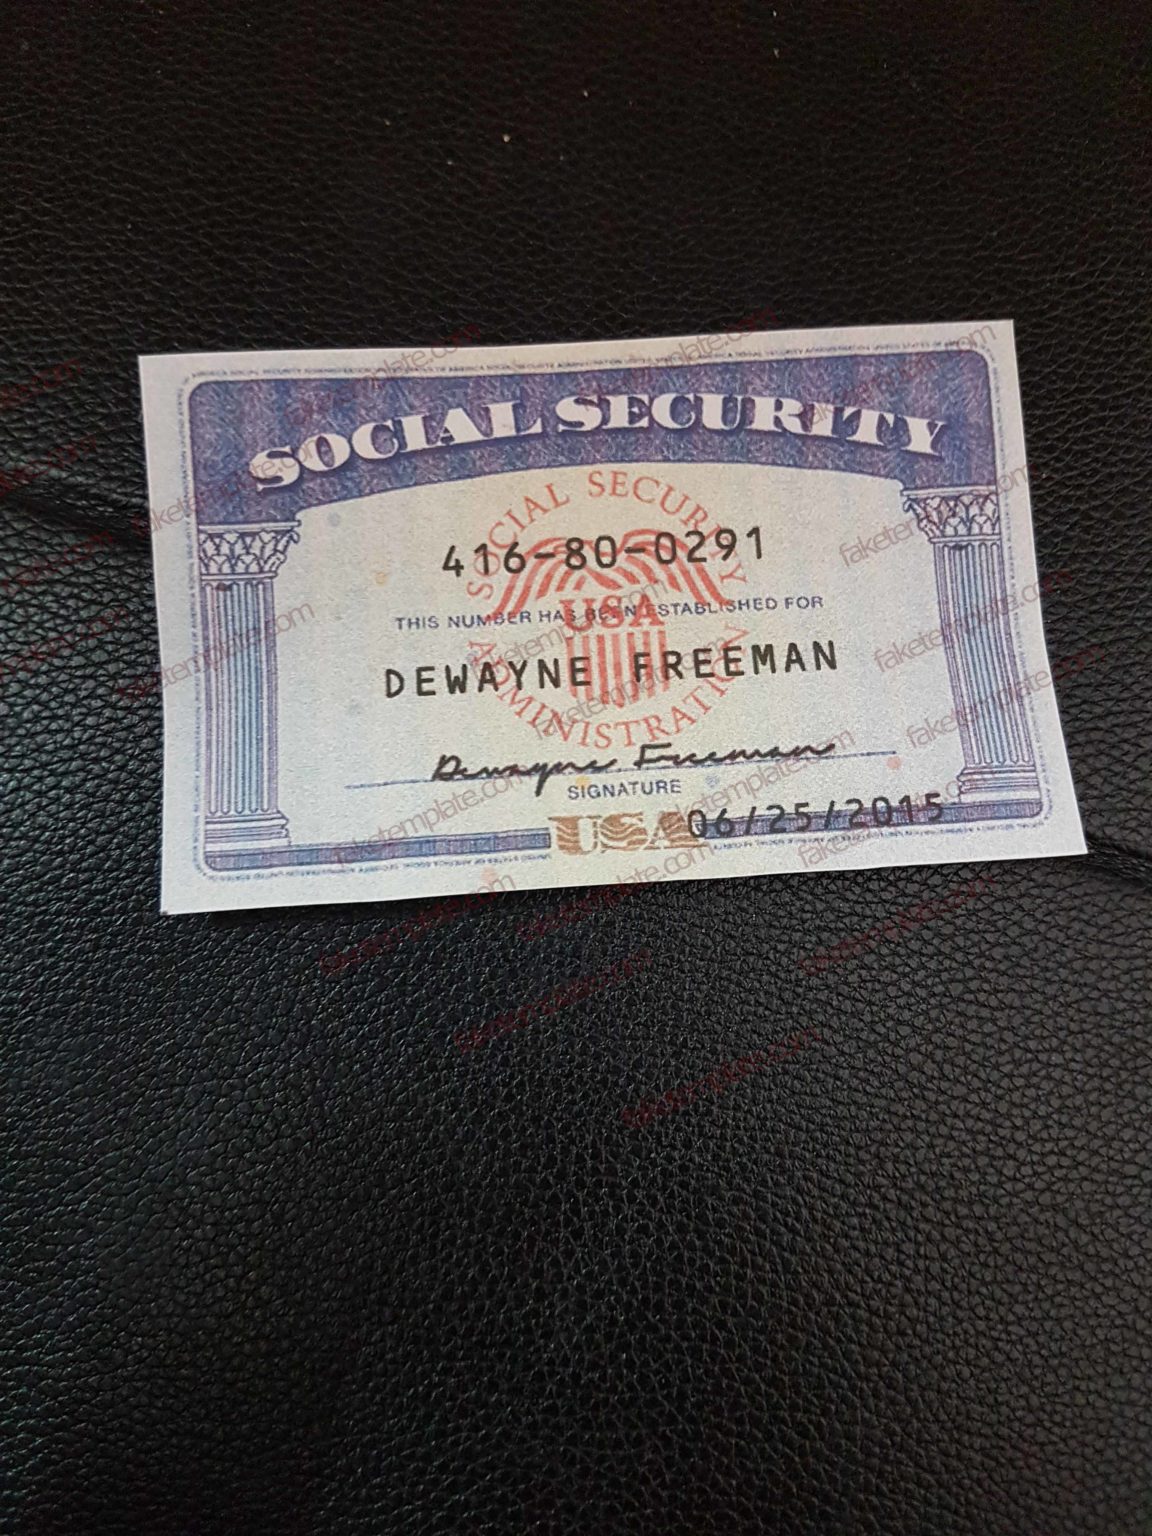 Fake Social Security Card Template Download